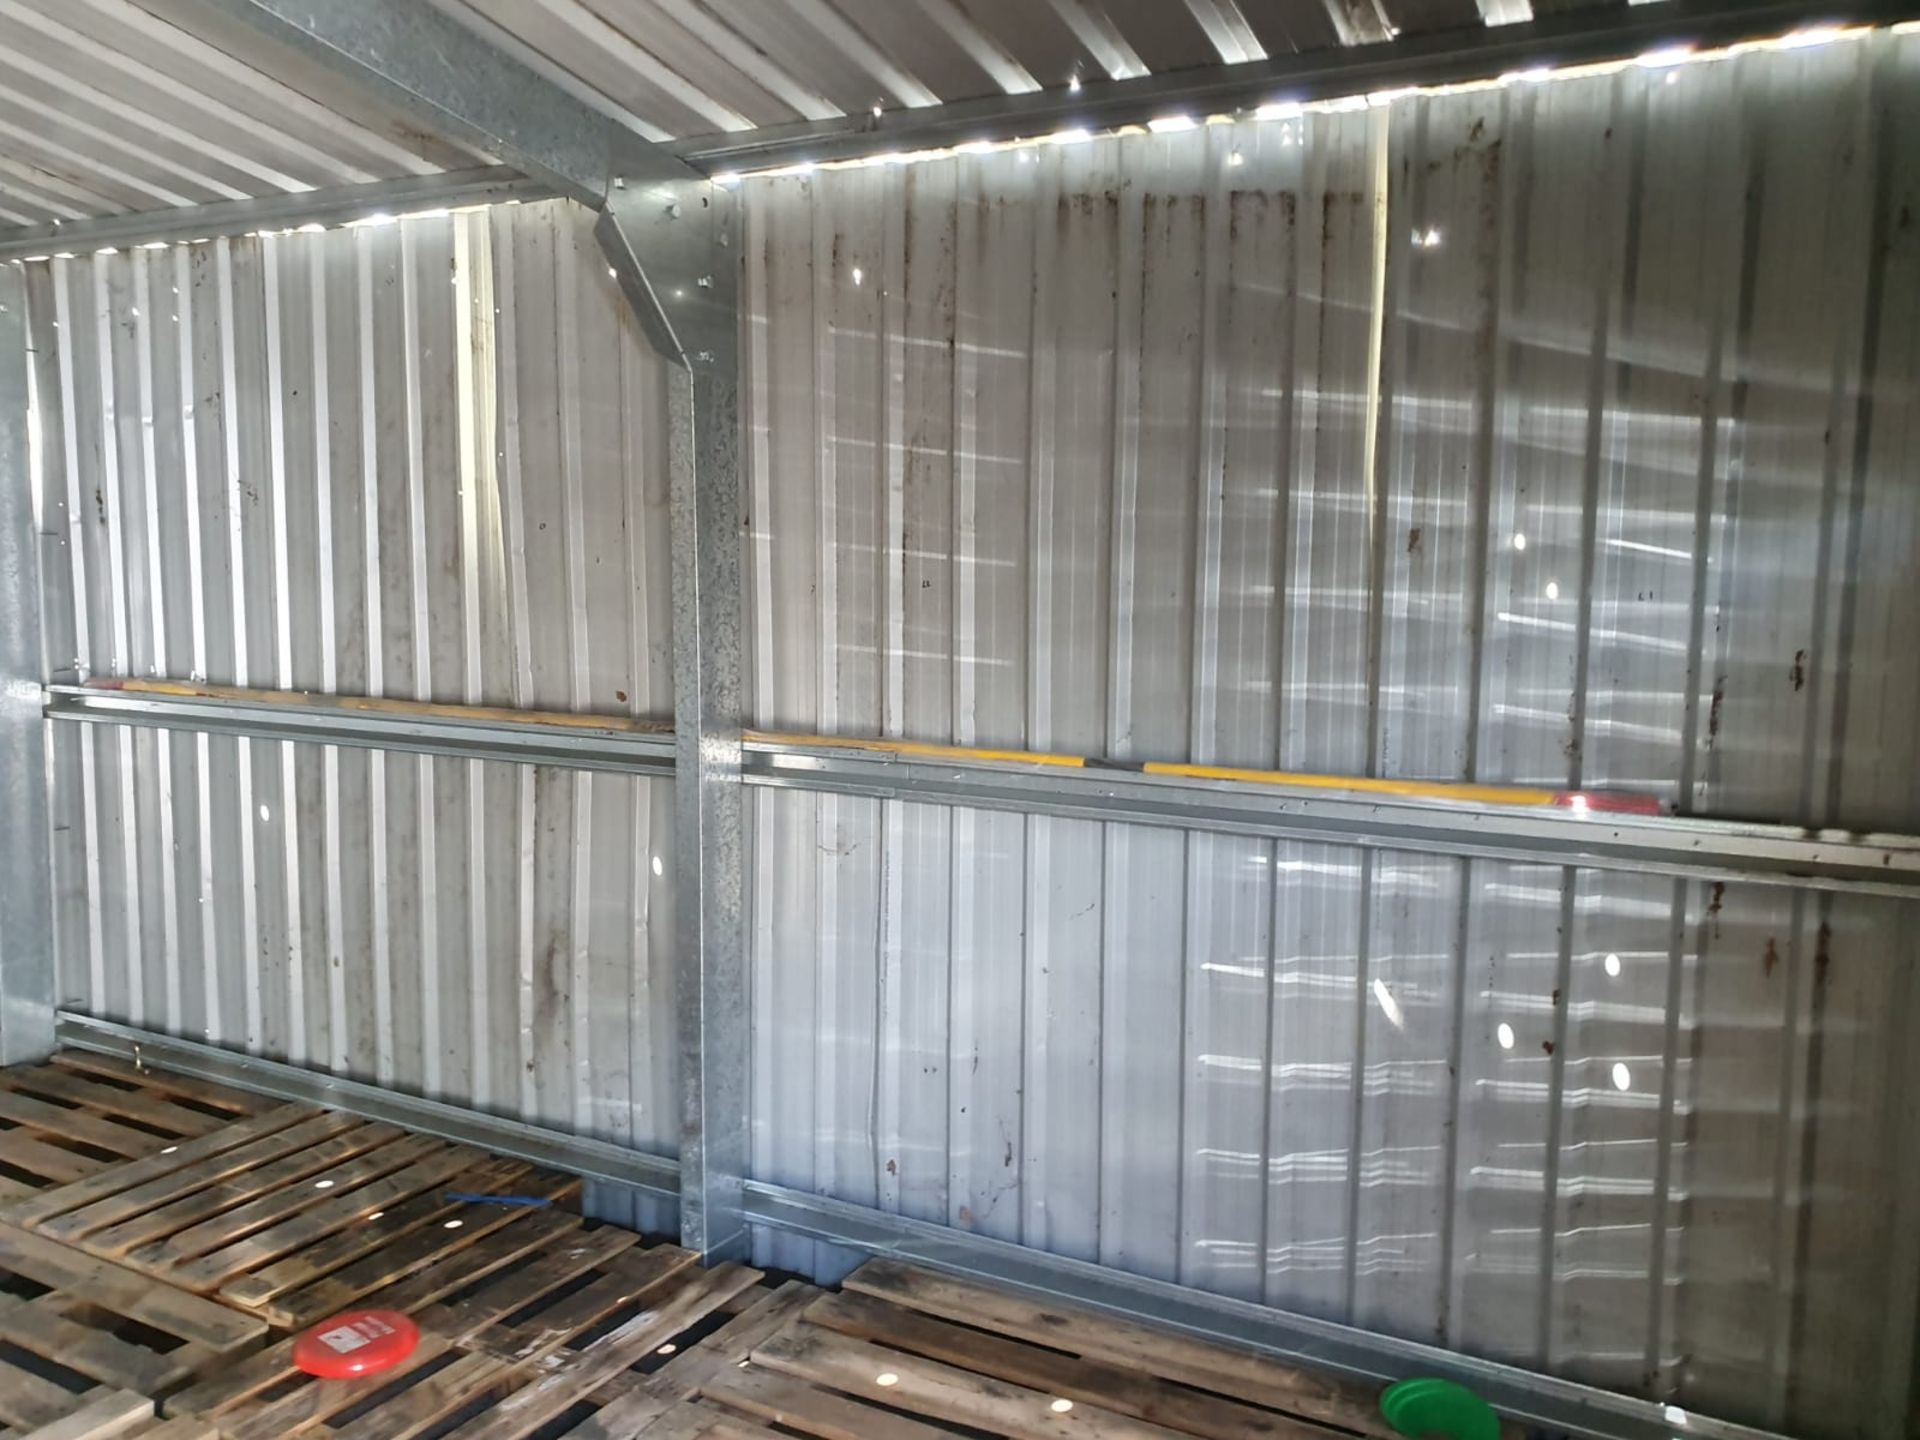 1 x Large Steel Storage Shed Container With Four Wooden Folding Doors - Approx Dimensions 5M x 5M - Image 13 of 16